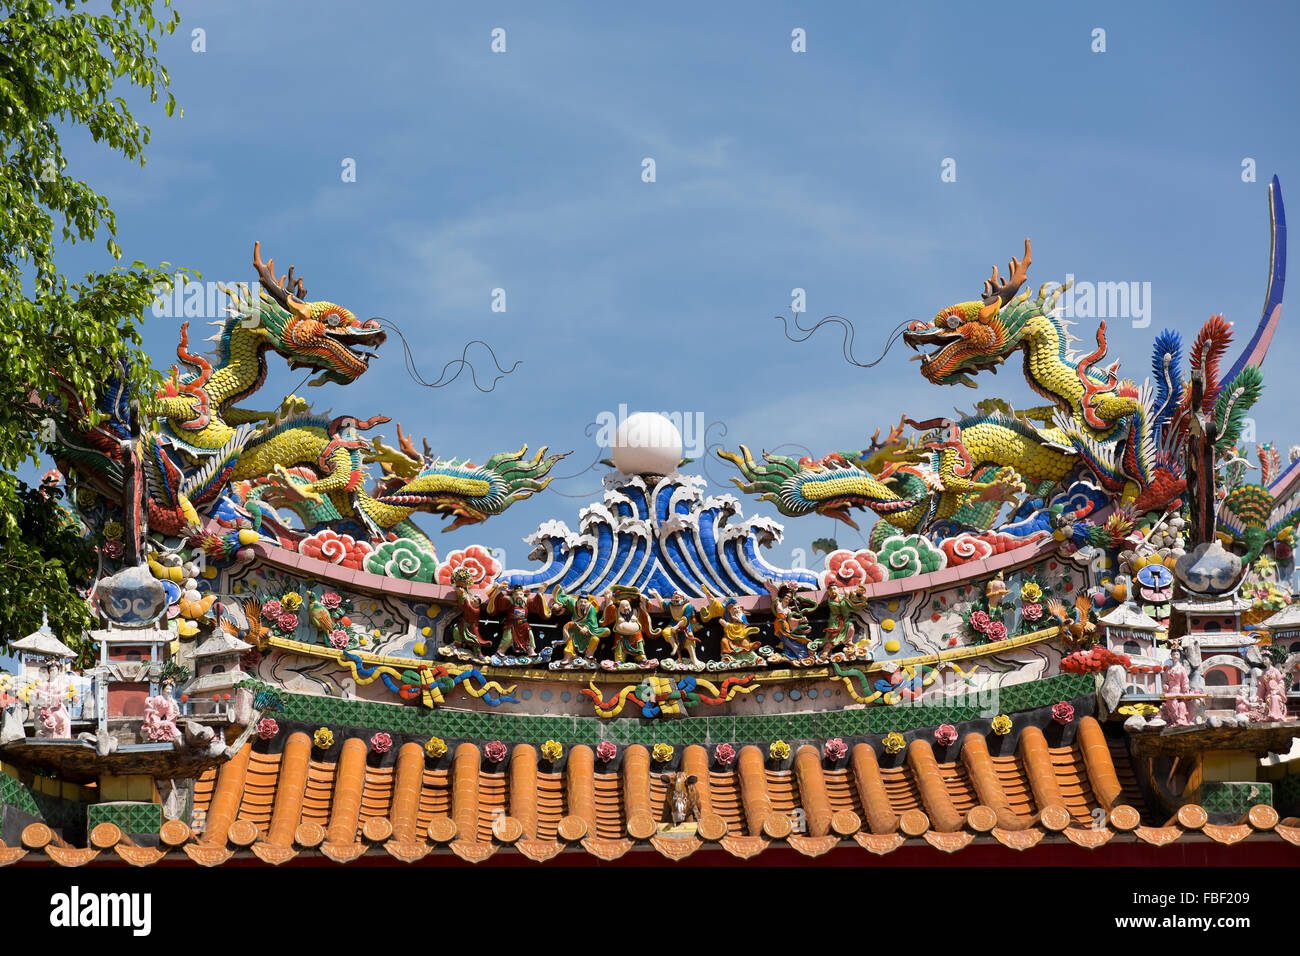 Colourful and ornate temple roof decorated with water dragons. Stock Photo